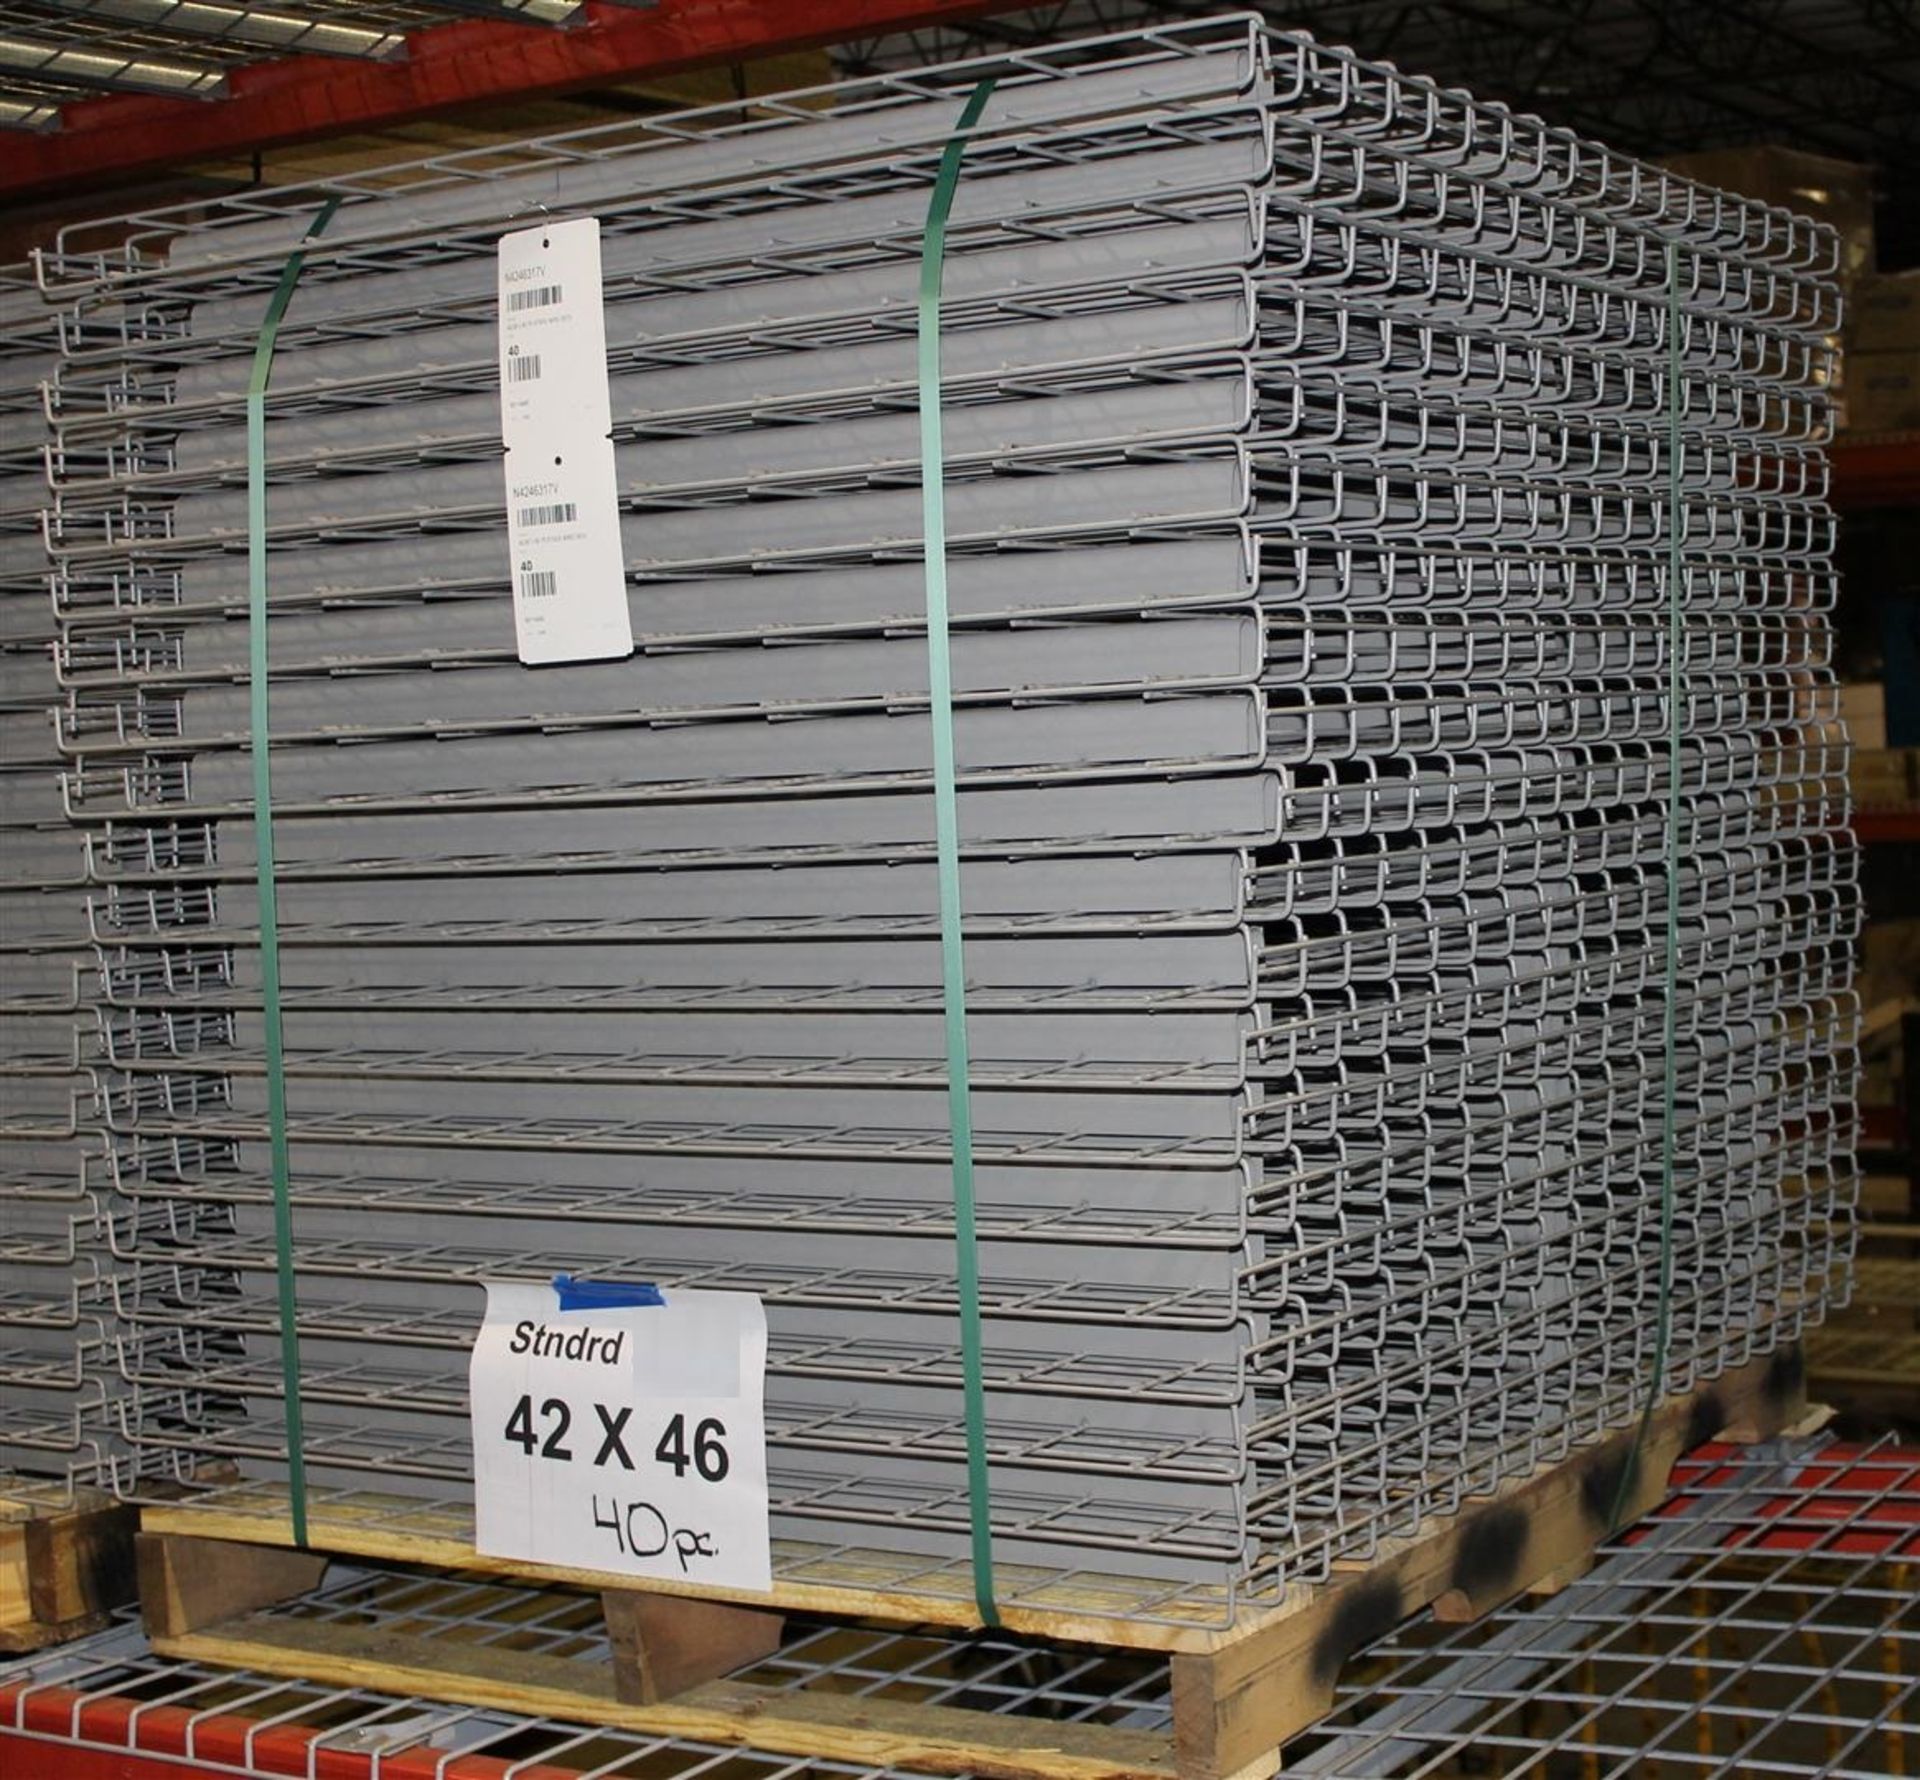 NEW 40 PCS OF STANDARD 42" X 46" WIREDECK - 2200 LBS CAPACITY - Image 2 of 2